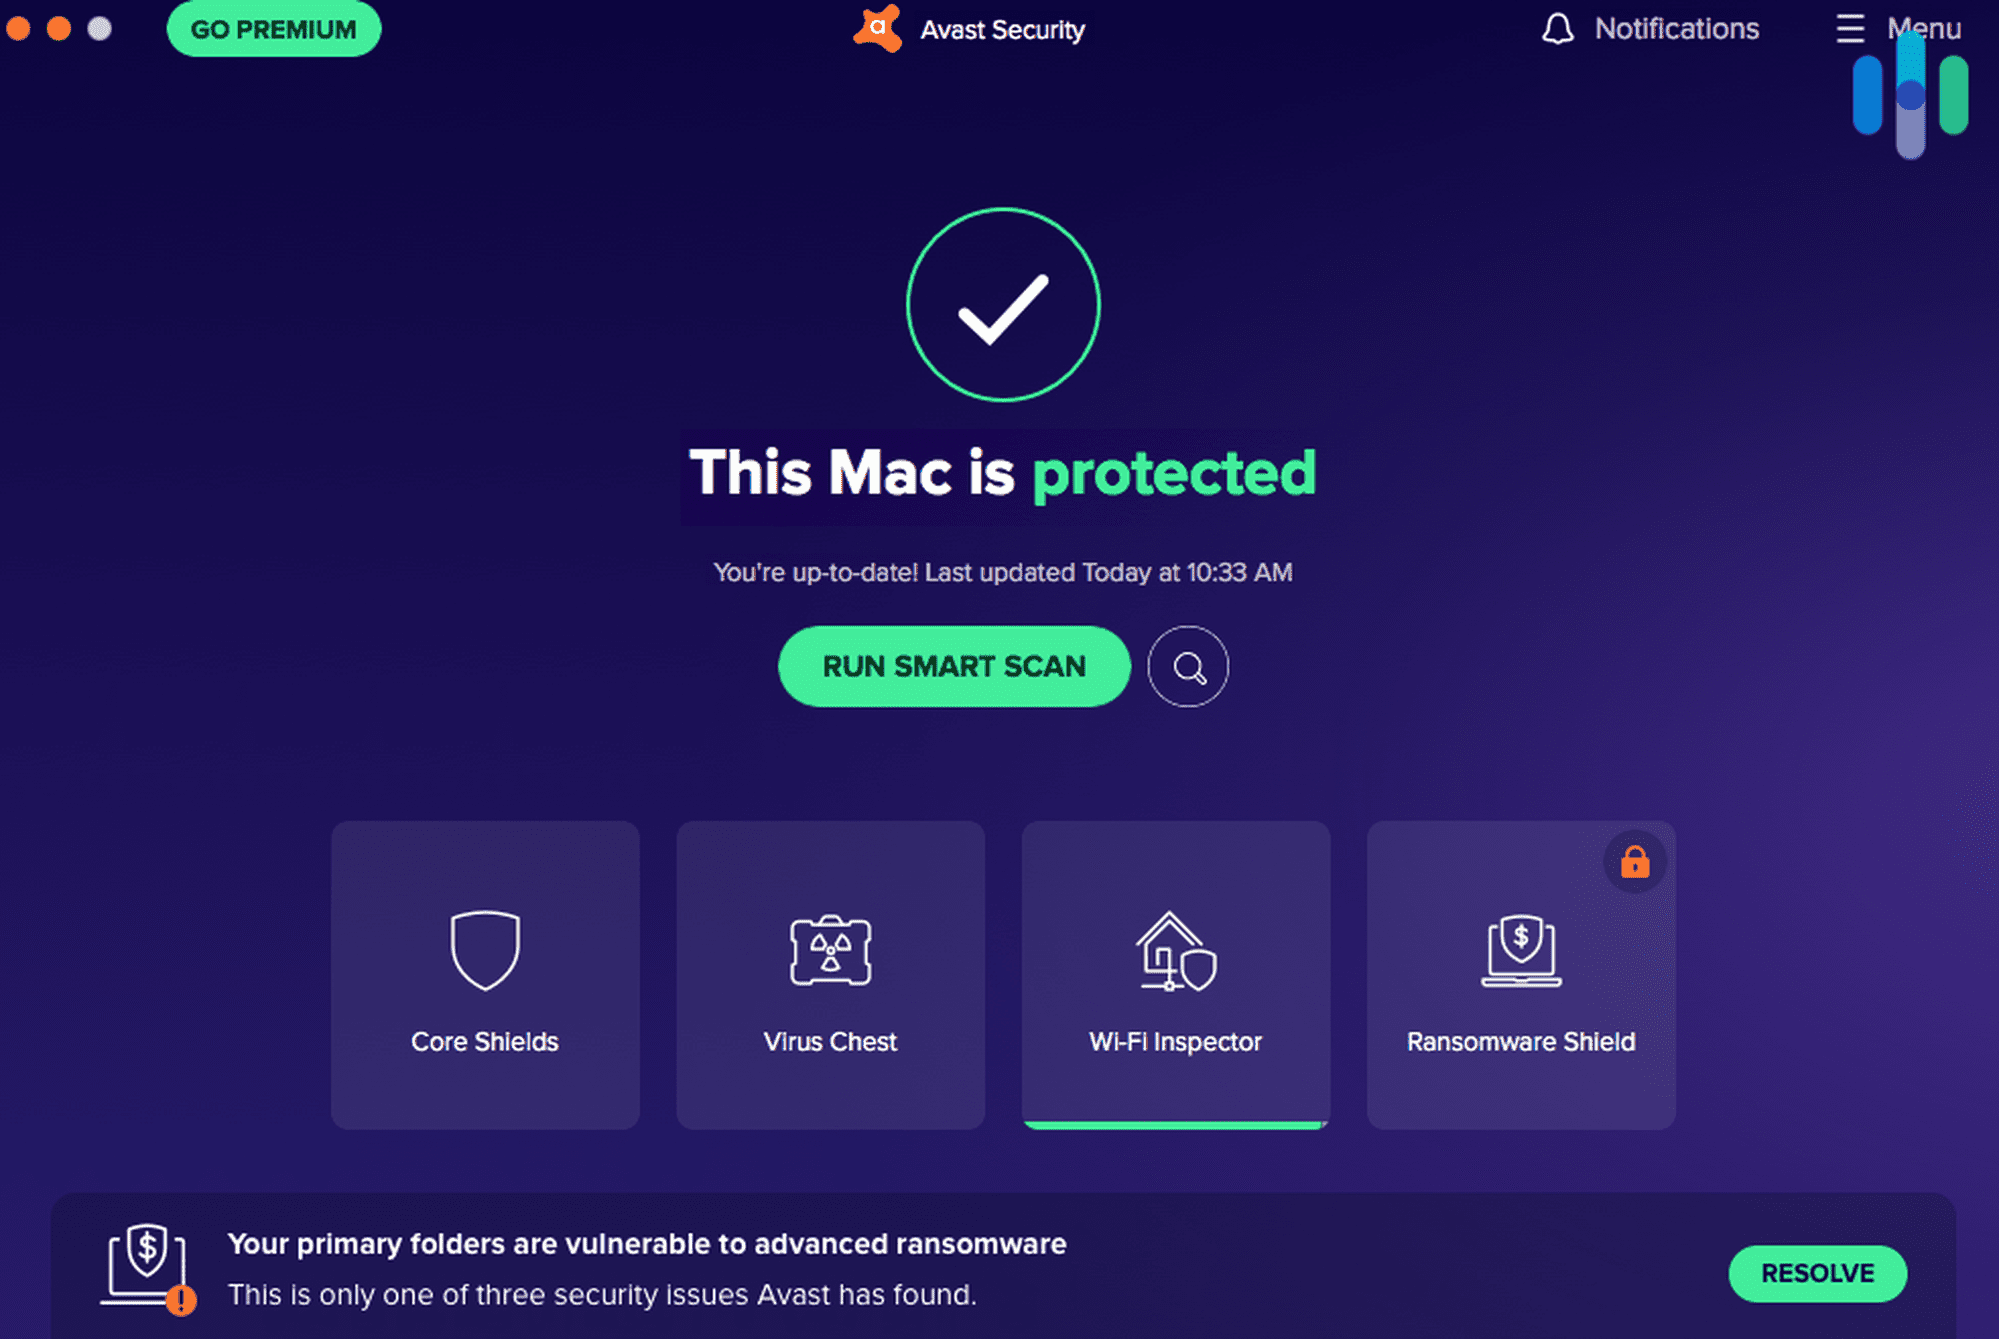 does avast security run well with adguard for macvs